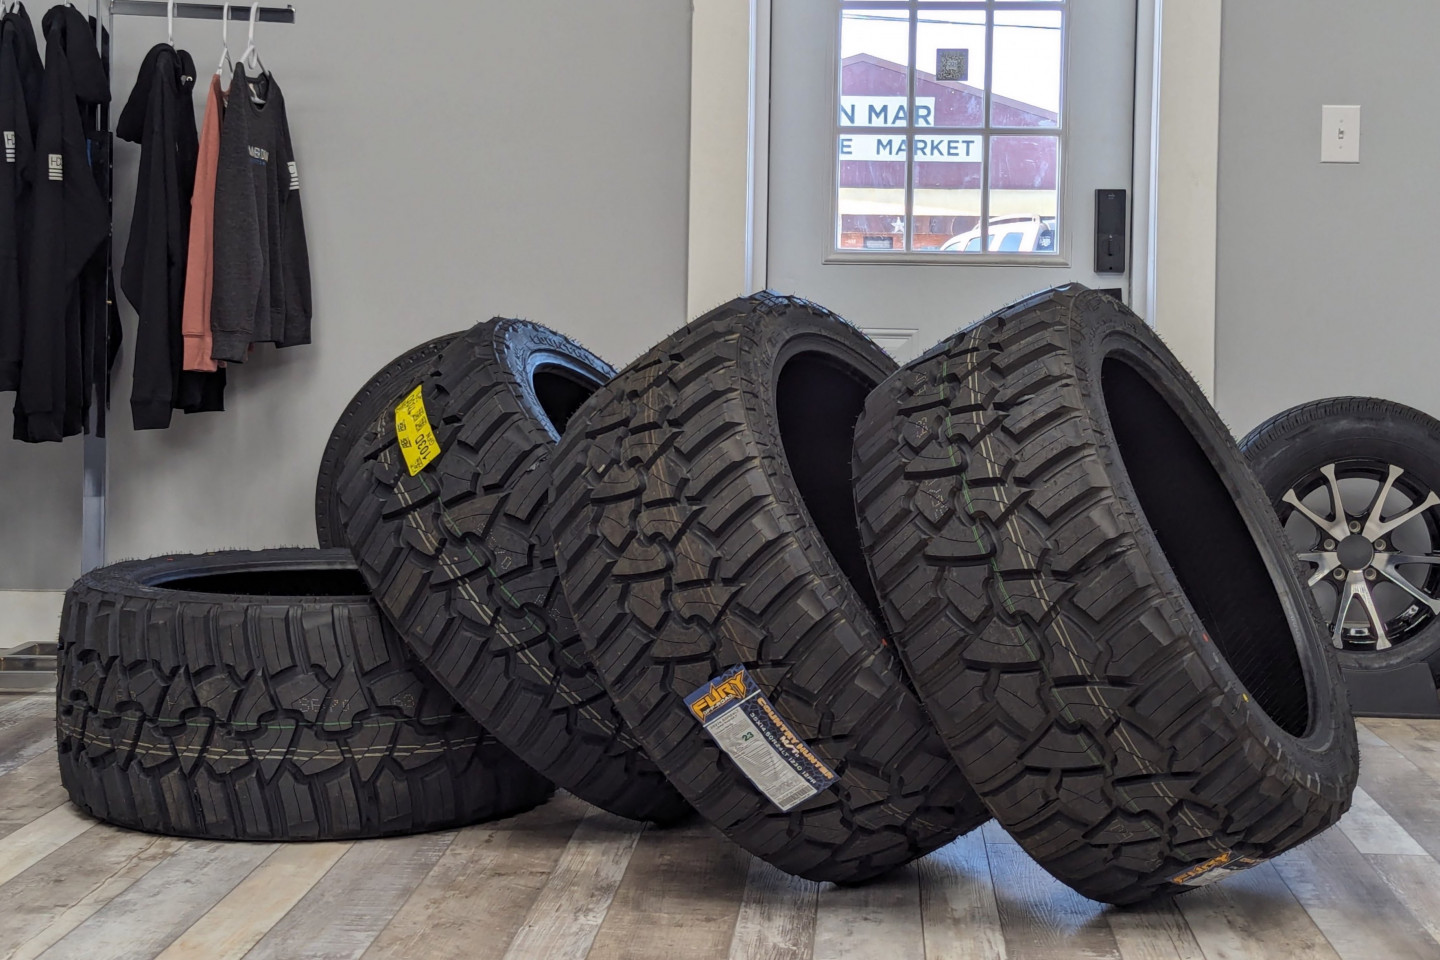 For all your tire, wheel, and lift kit needs!